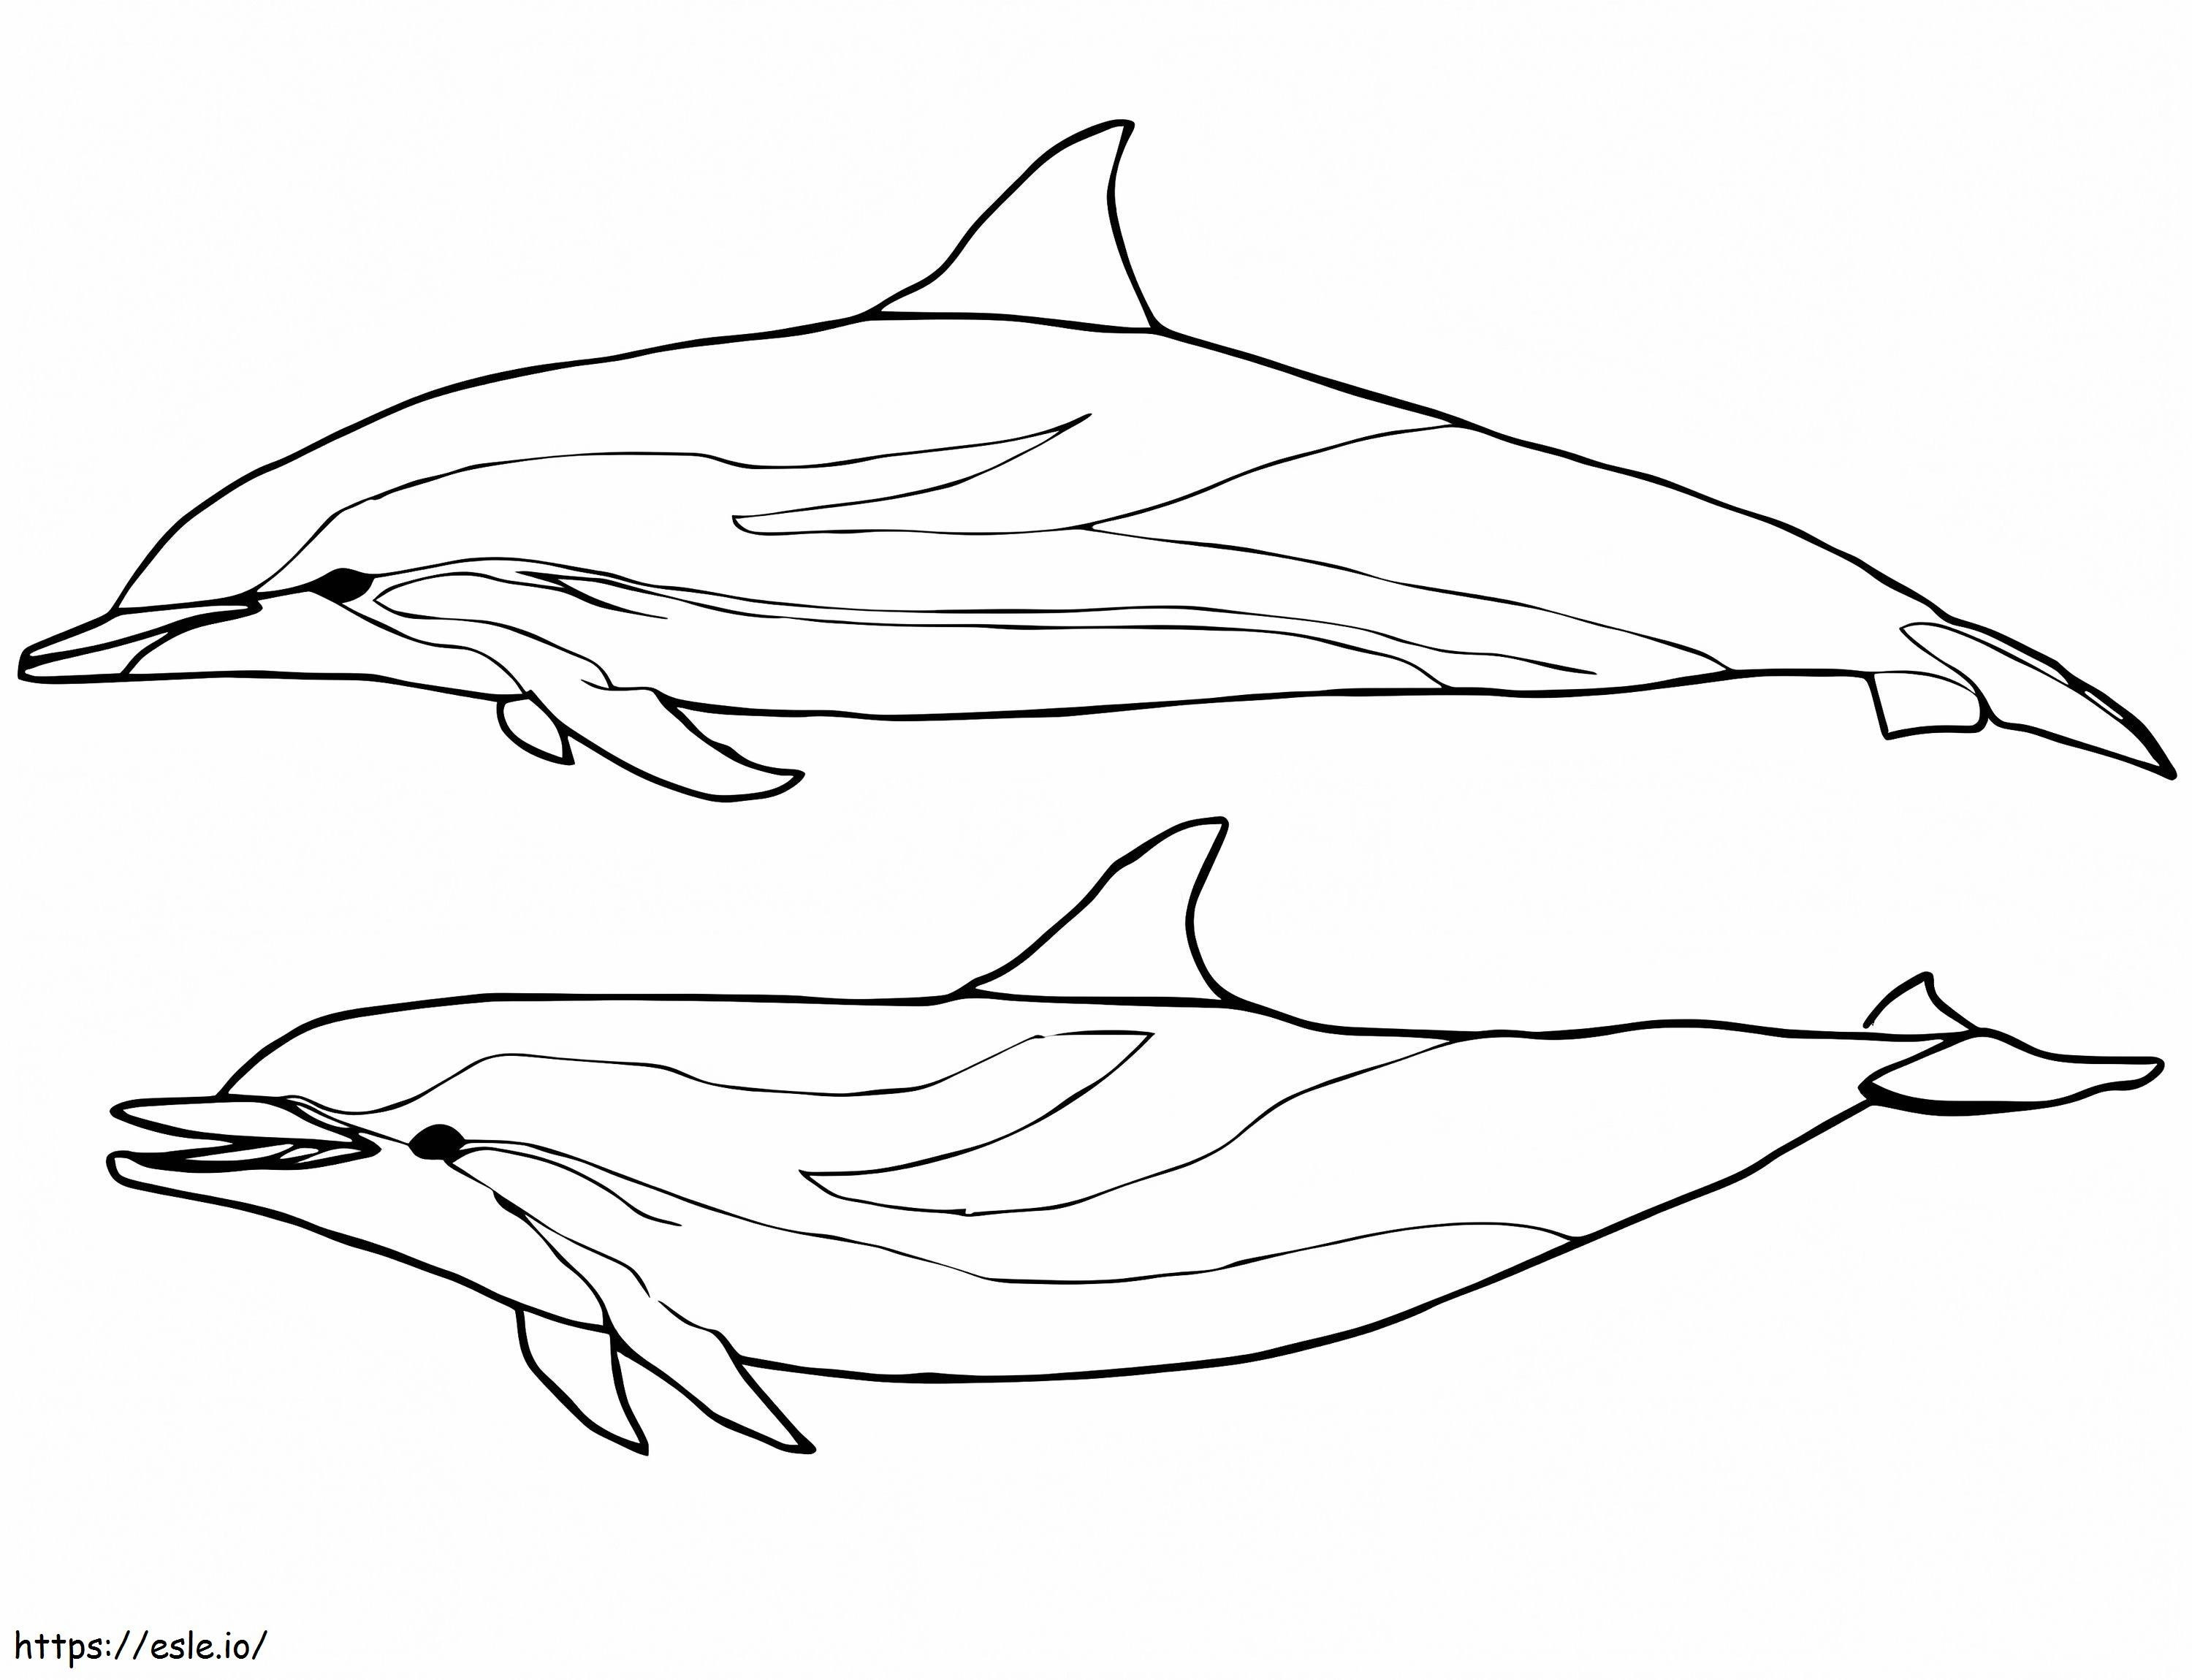 Two Striped Dolphins coloring page